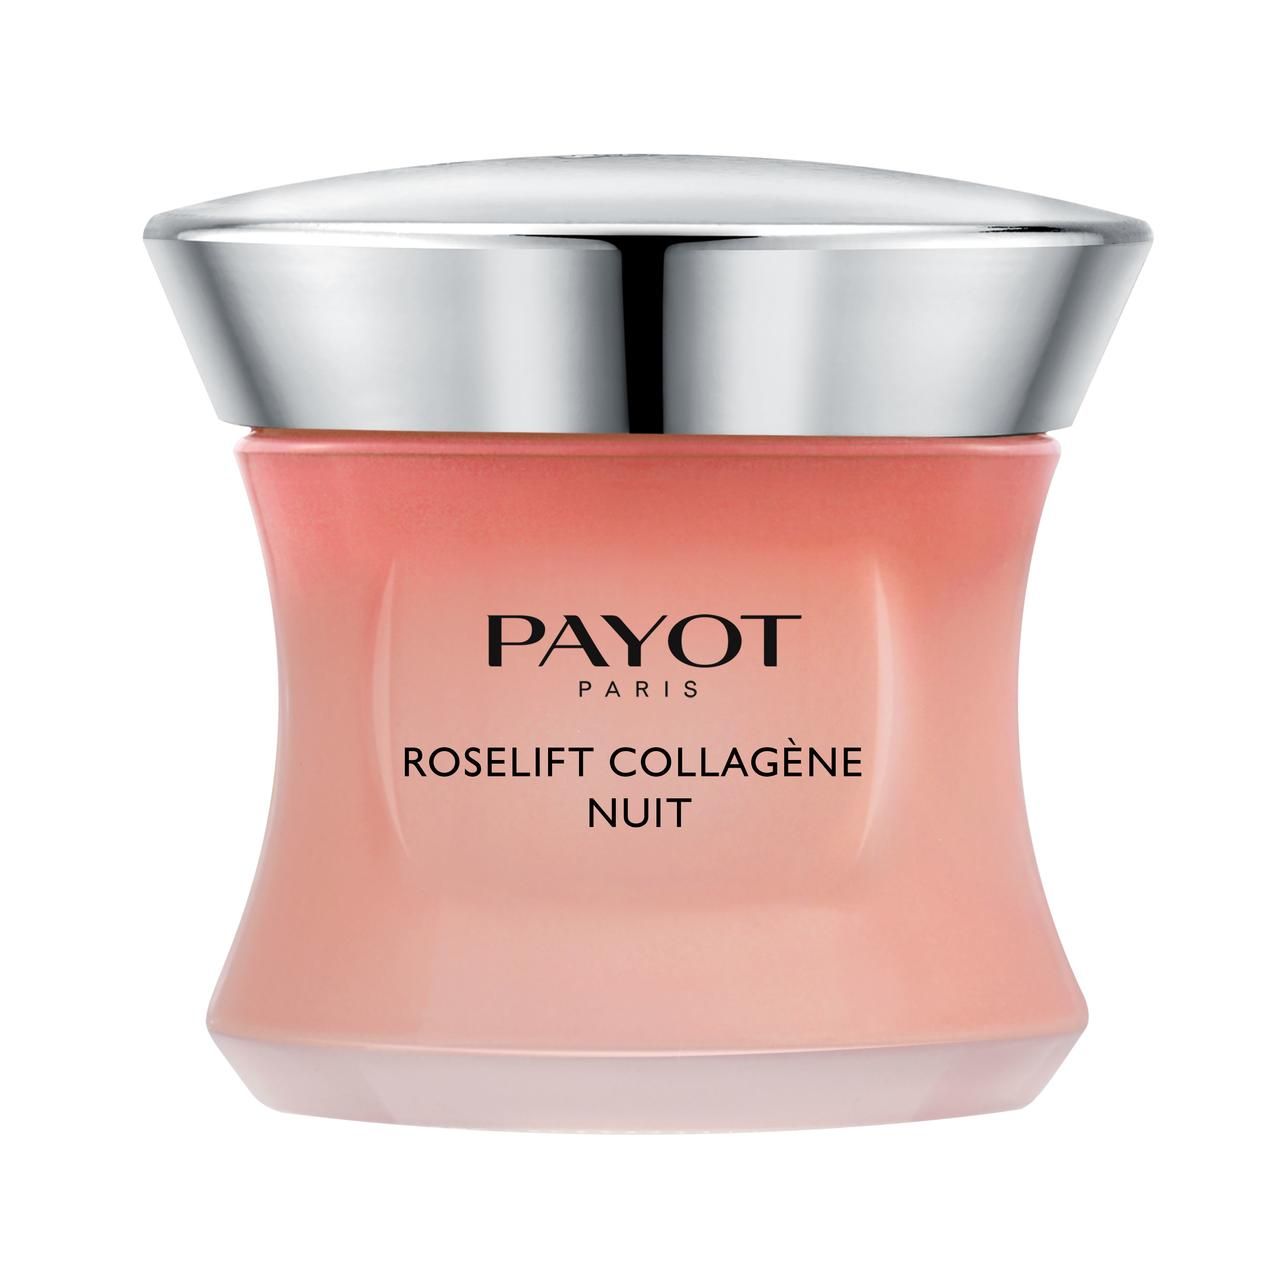 Payot, Roselift Collagène Nuit